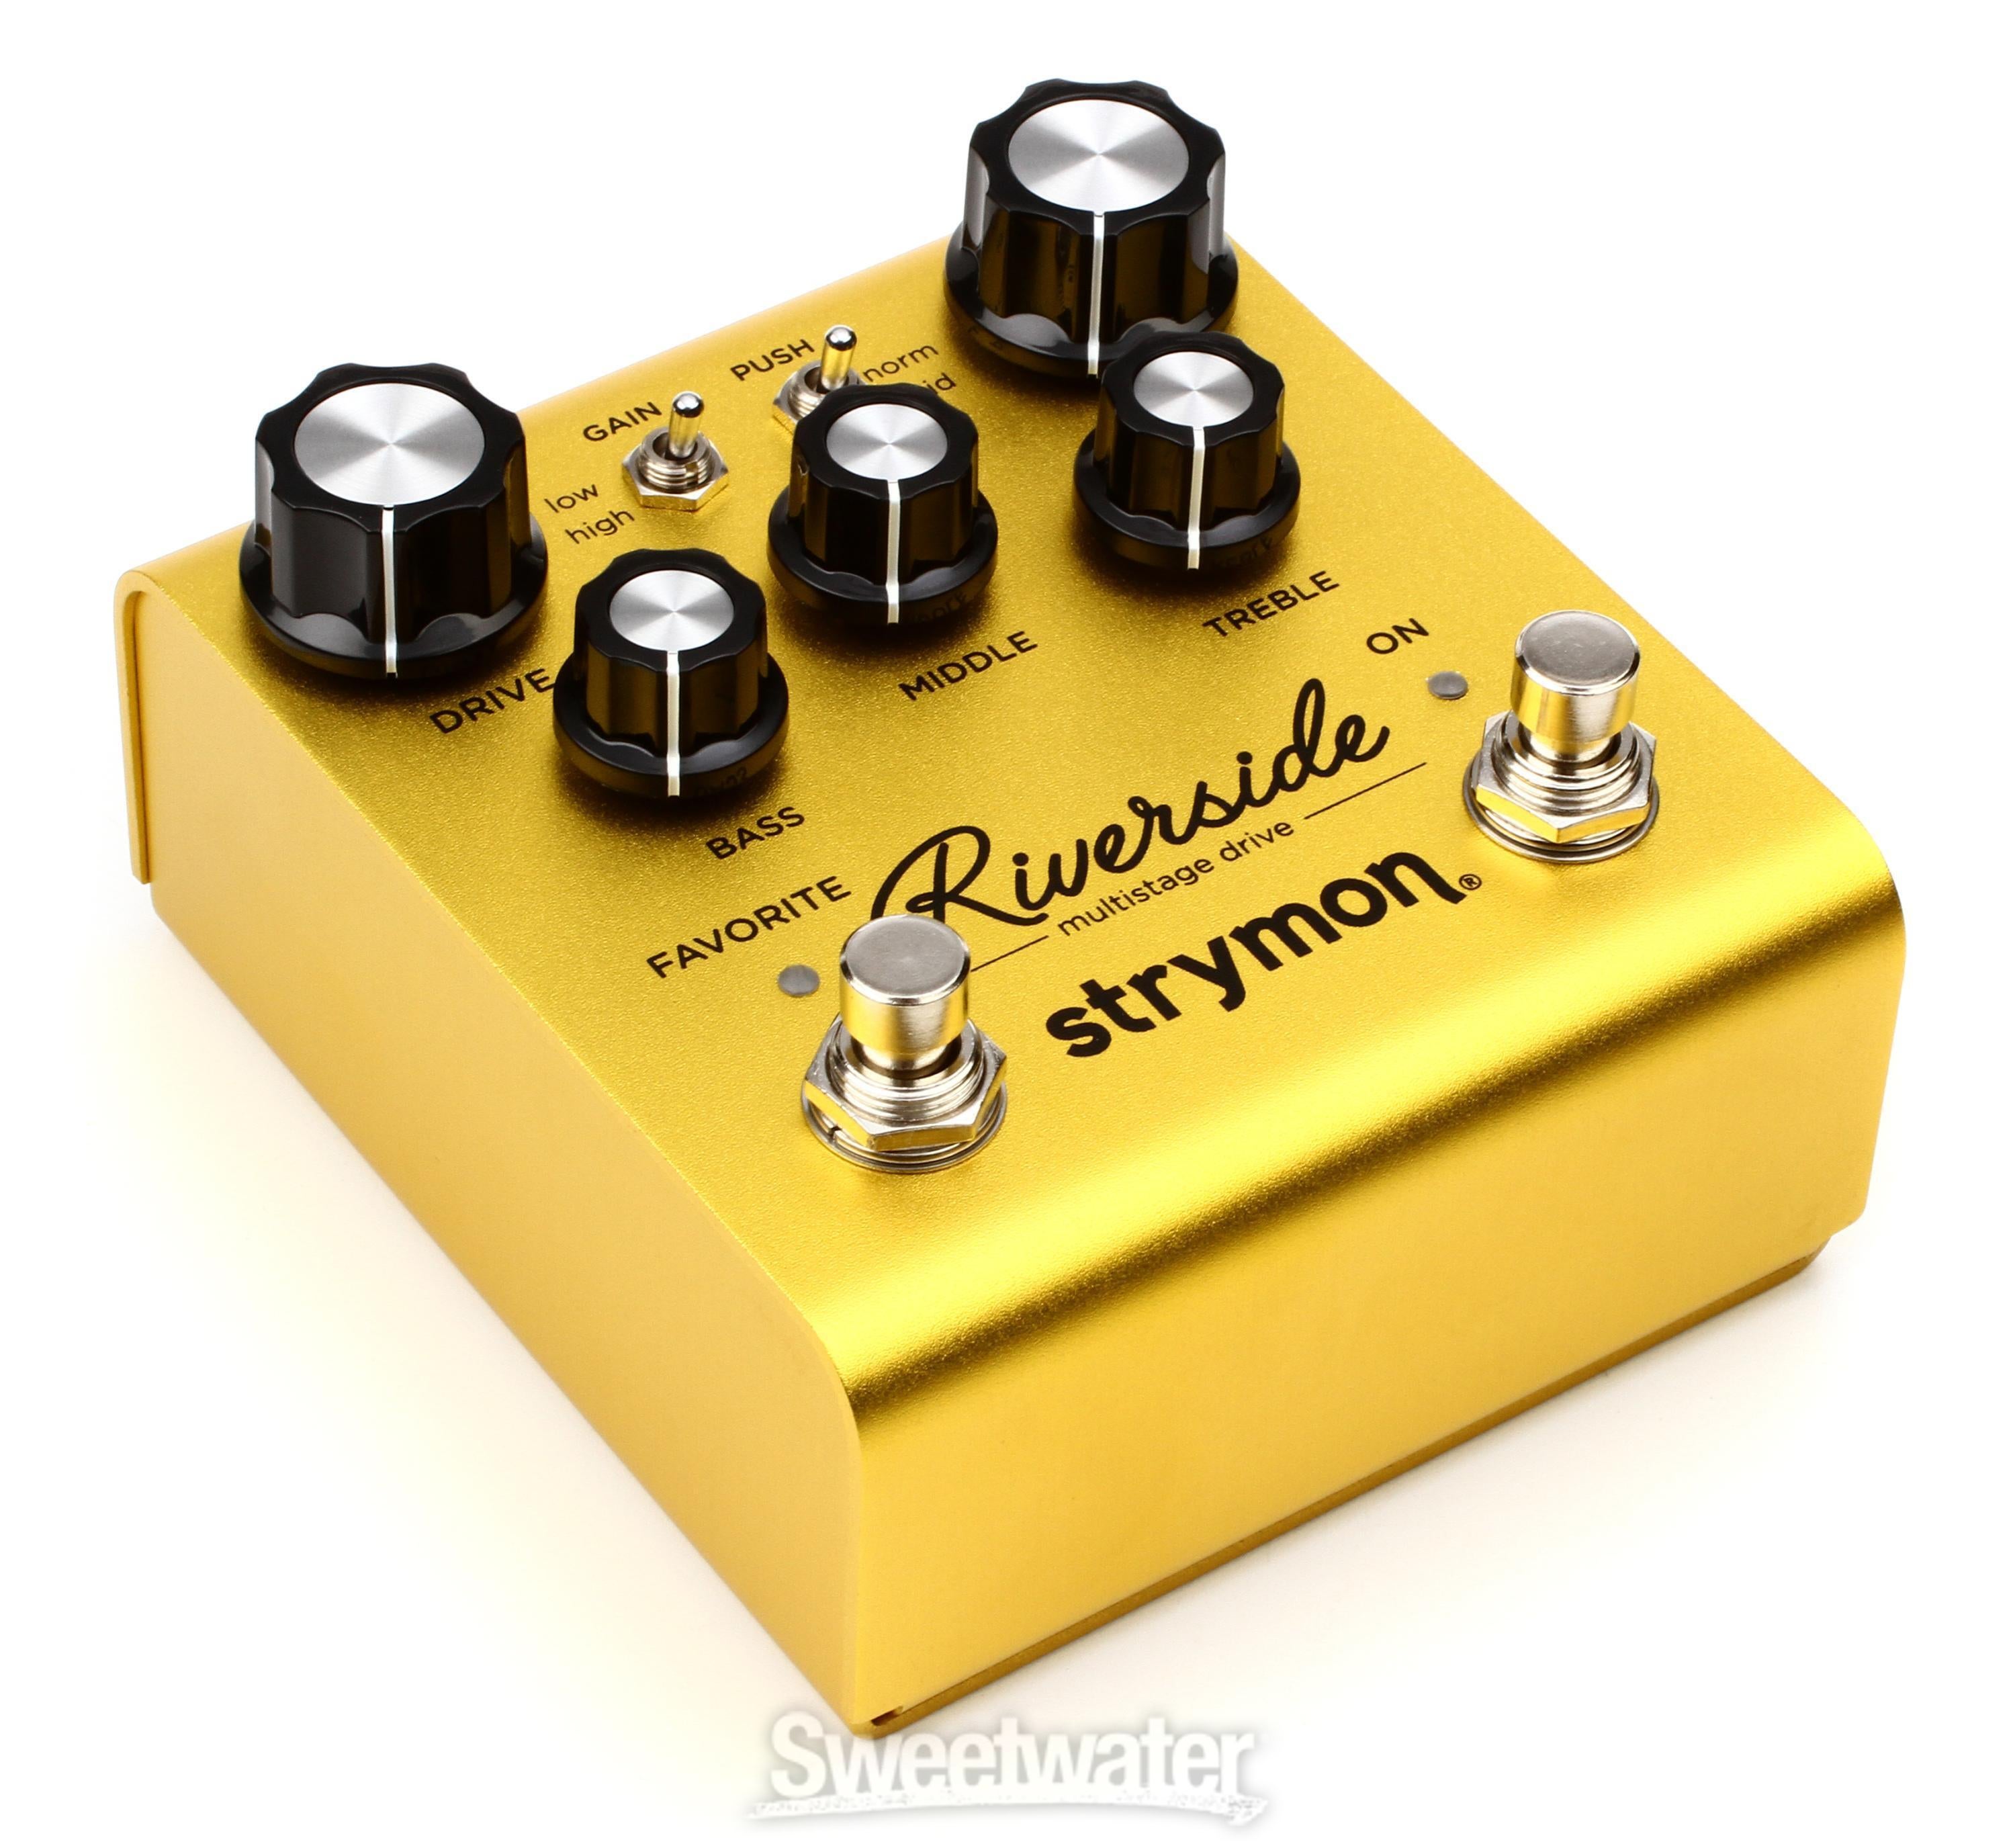 Strymon Riverside Multistage Drive Pedal Reviews | Sweetwater